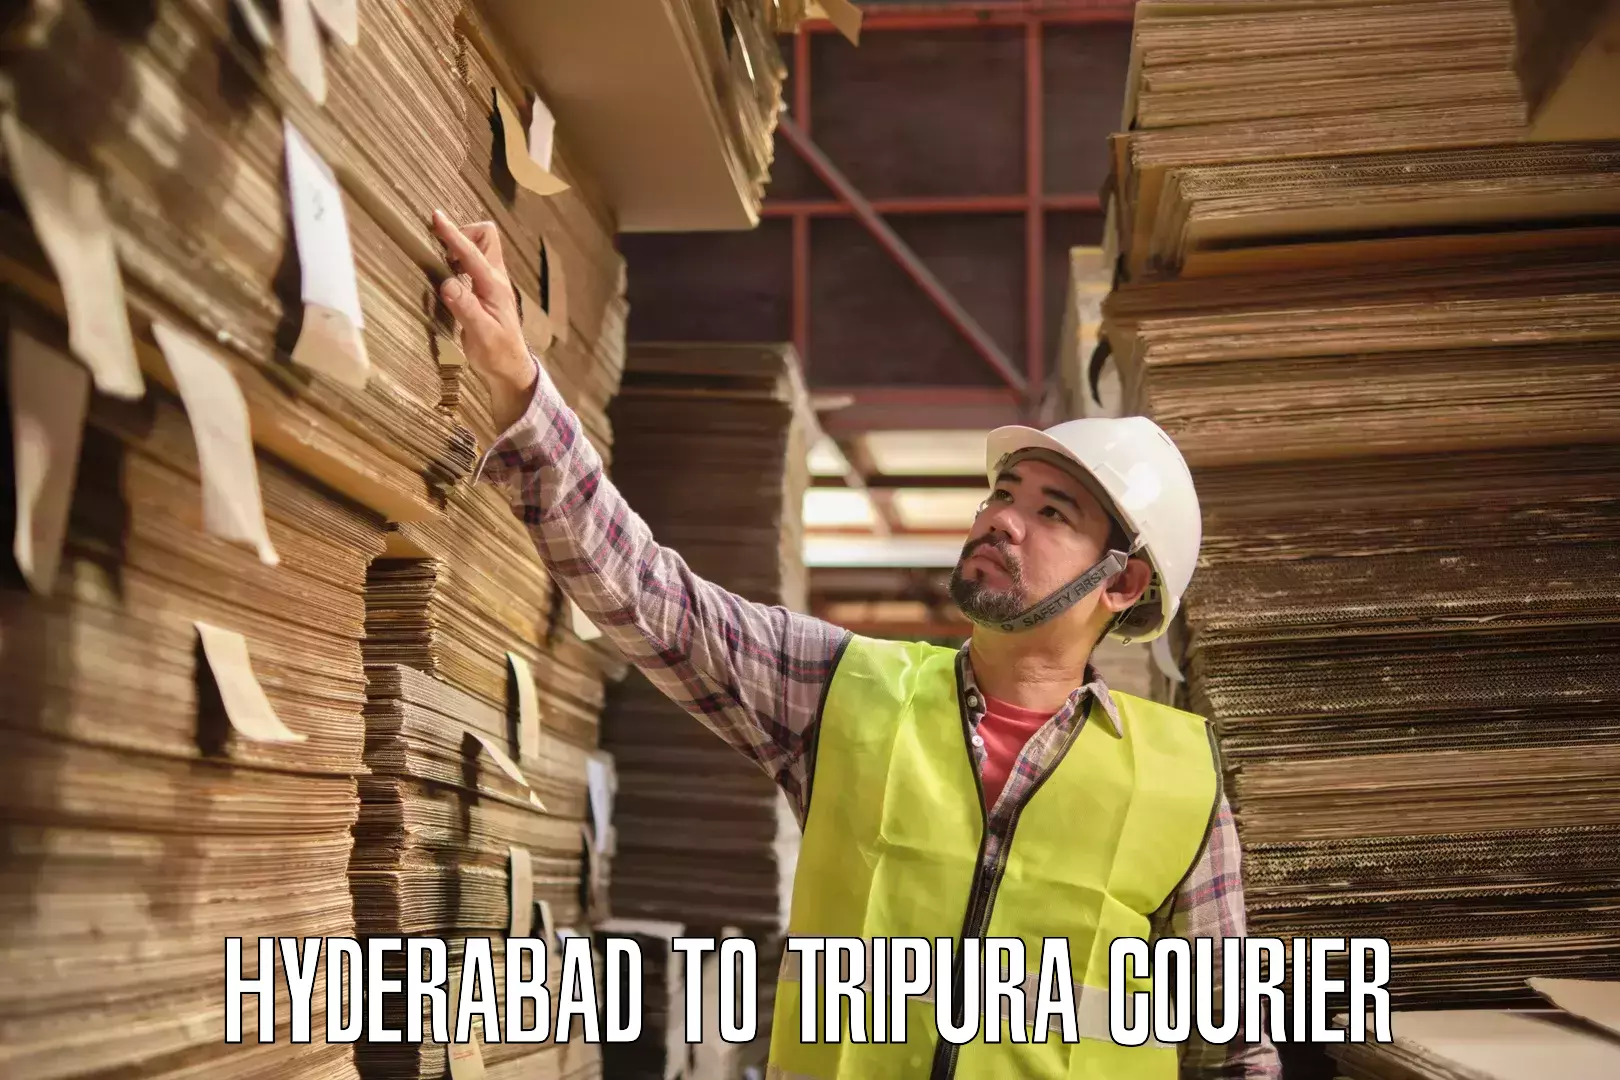 Full-service courier options Hyderabad to West Tripura